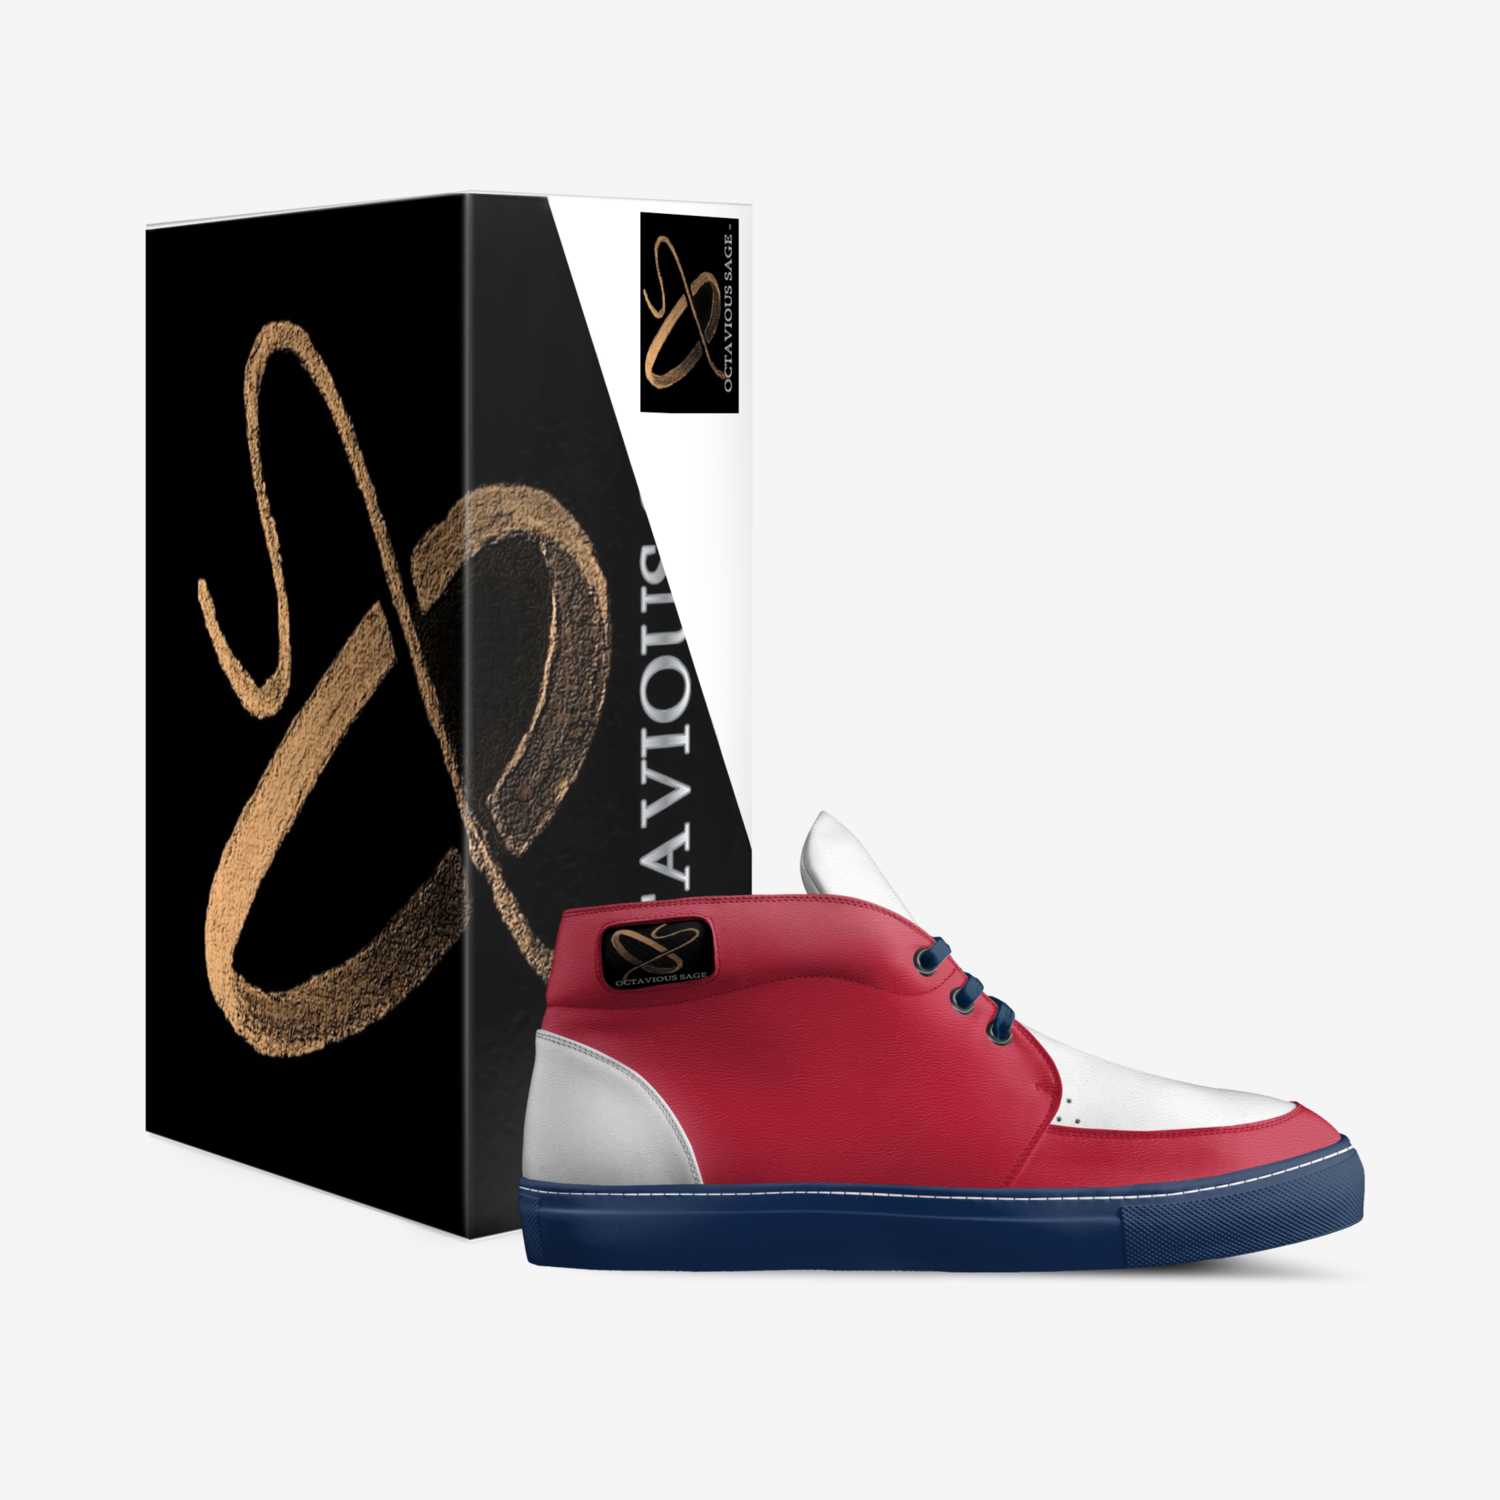 OS BY DESIGN custom made in Italy shoes by Octavious Sage | Box view